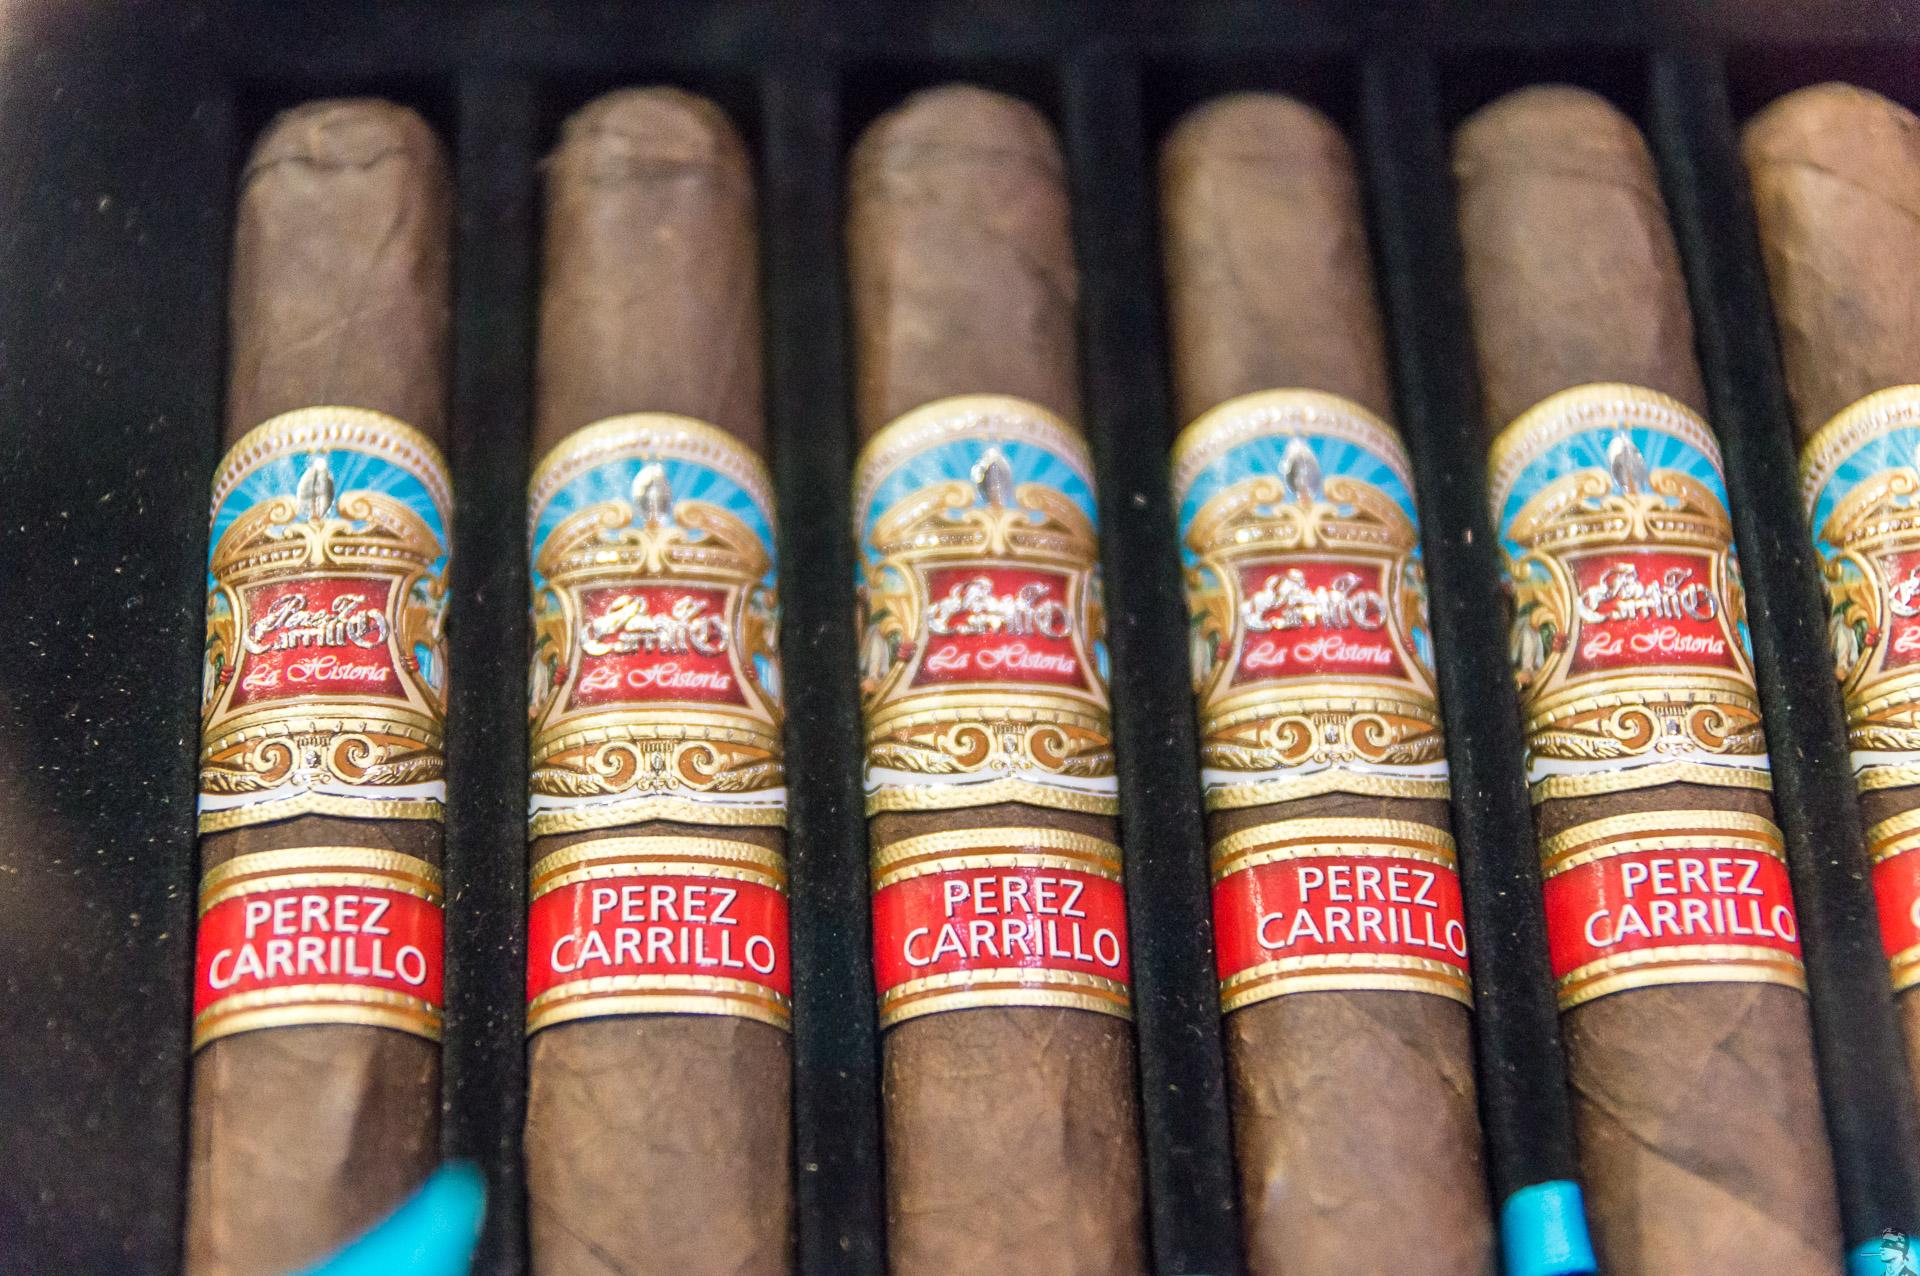 IPCPR 2014: The Show in Pictures - E.P. Carrillo